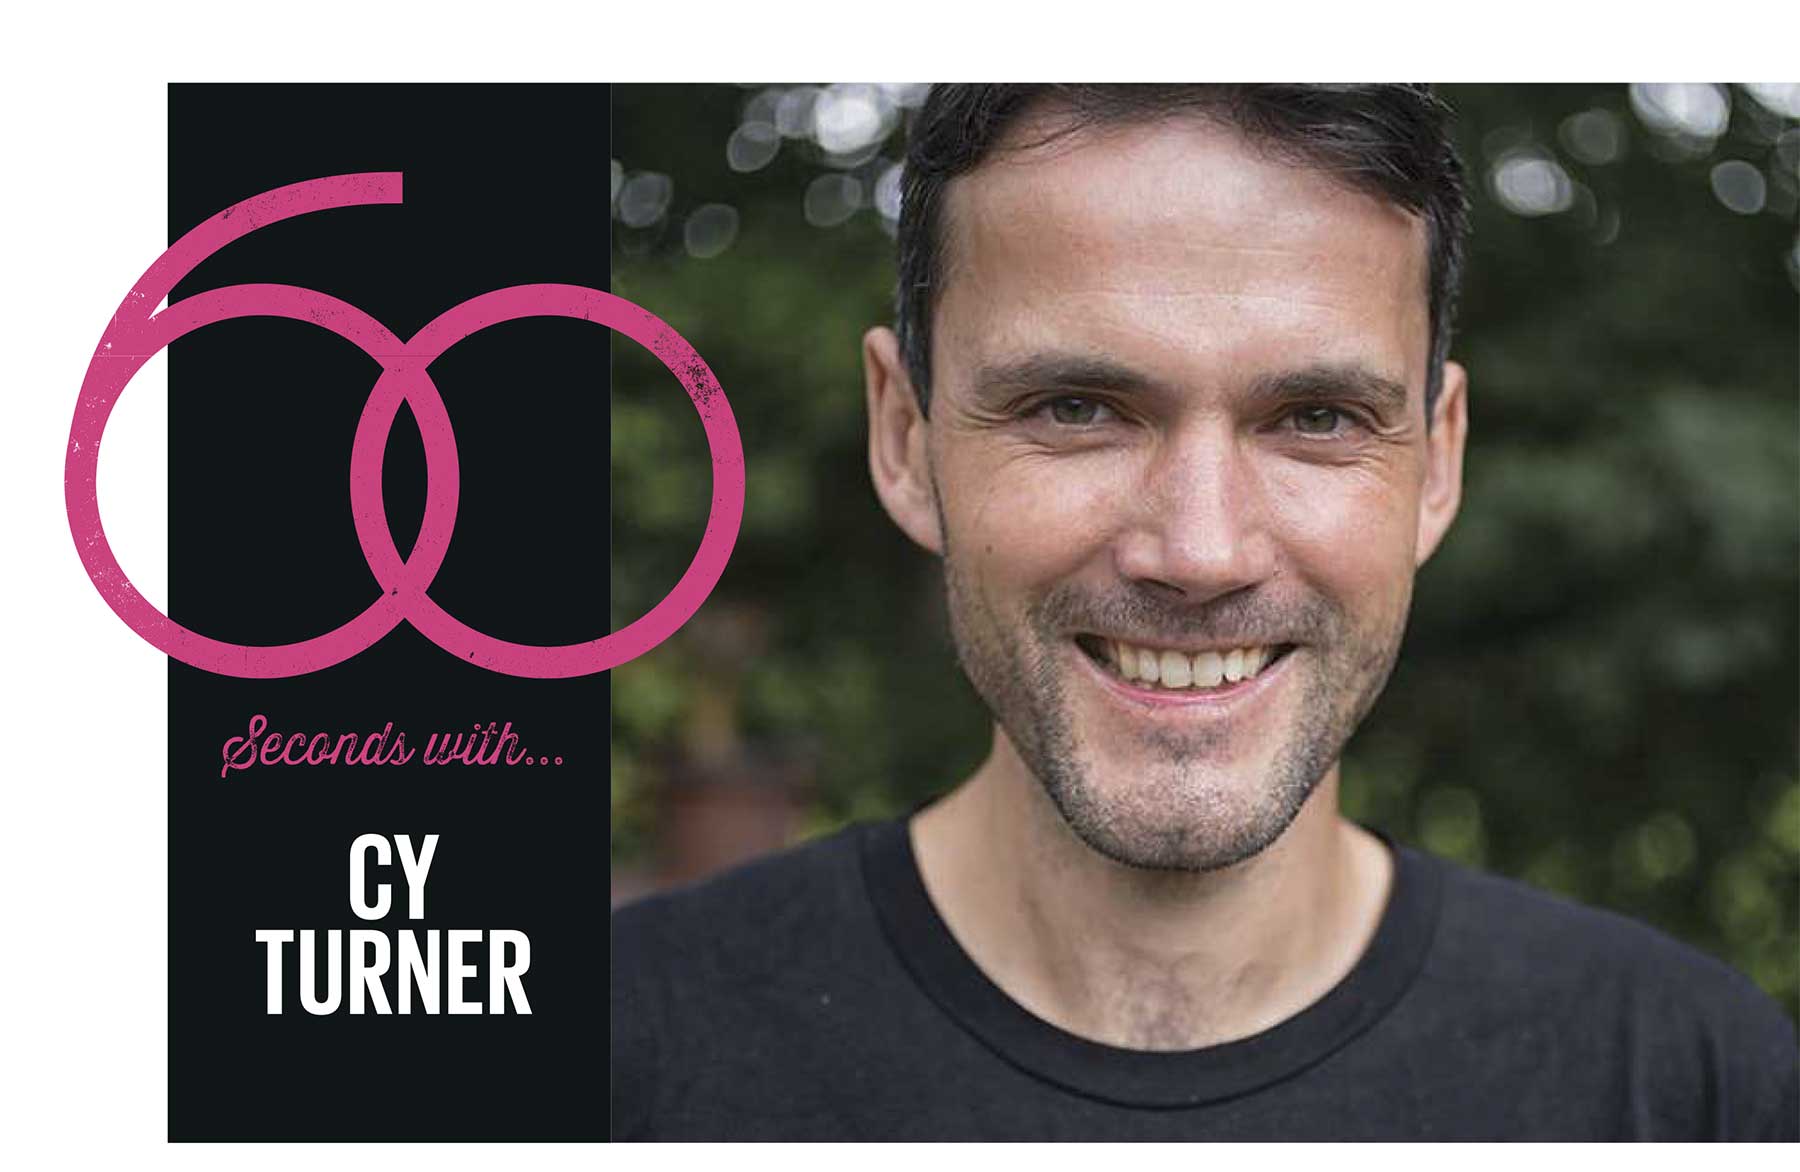 60 Seconds with Cy Turner